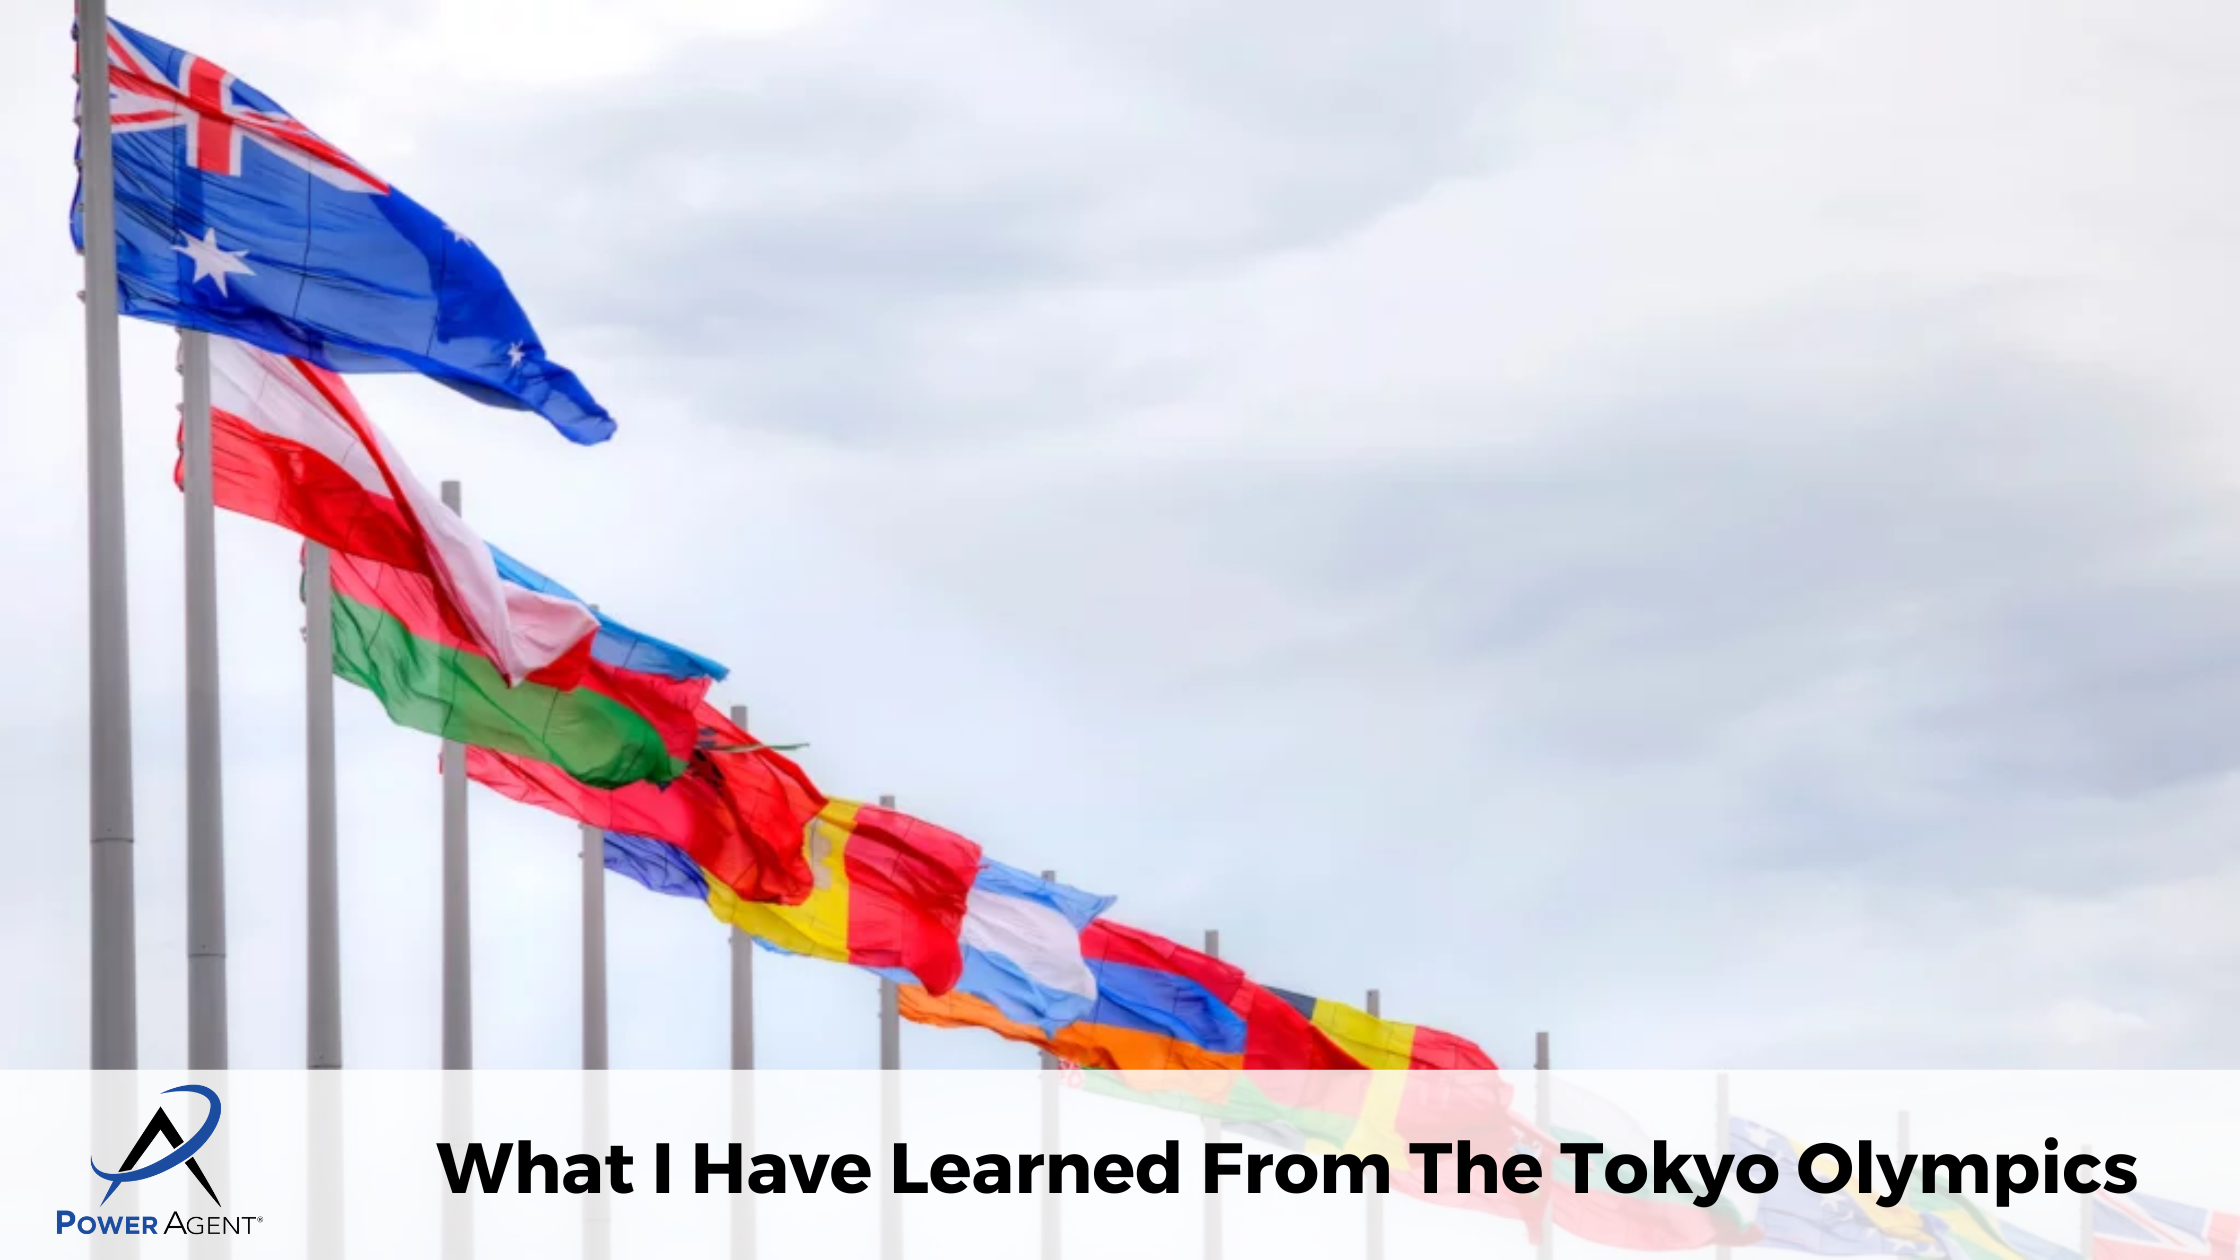 What I Have Learned From The Tokyo Olympics